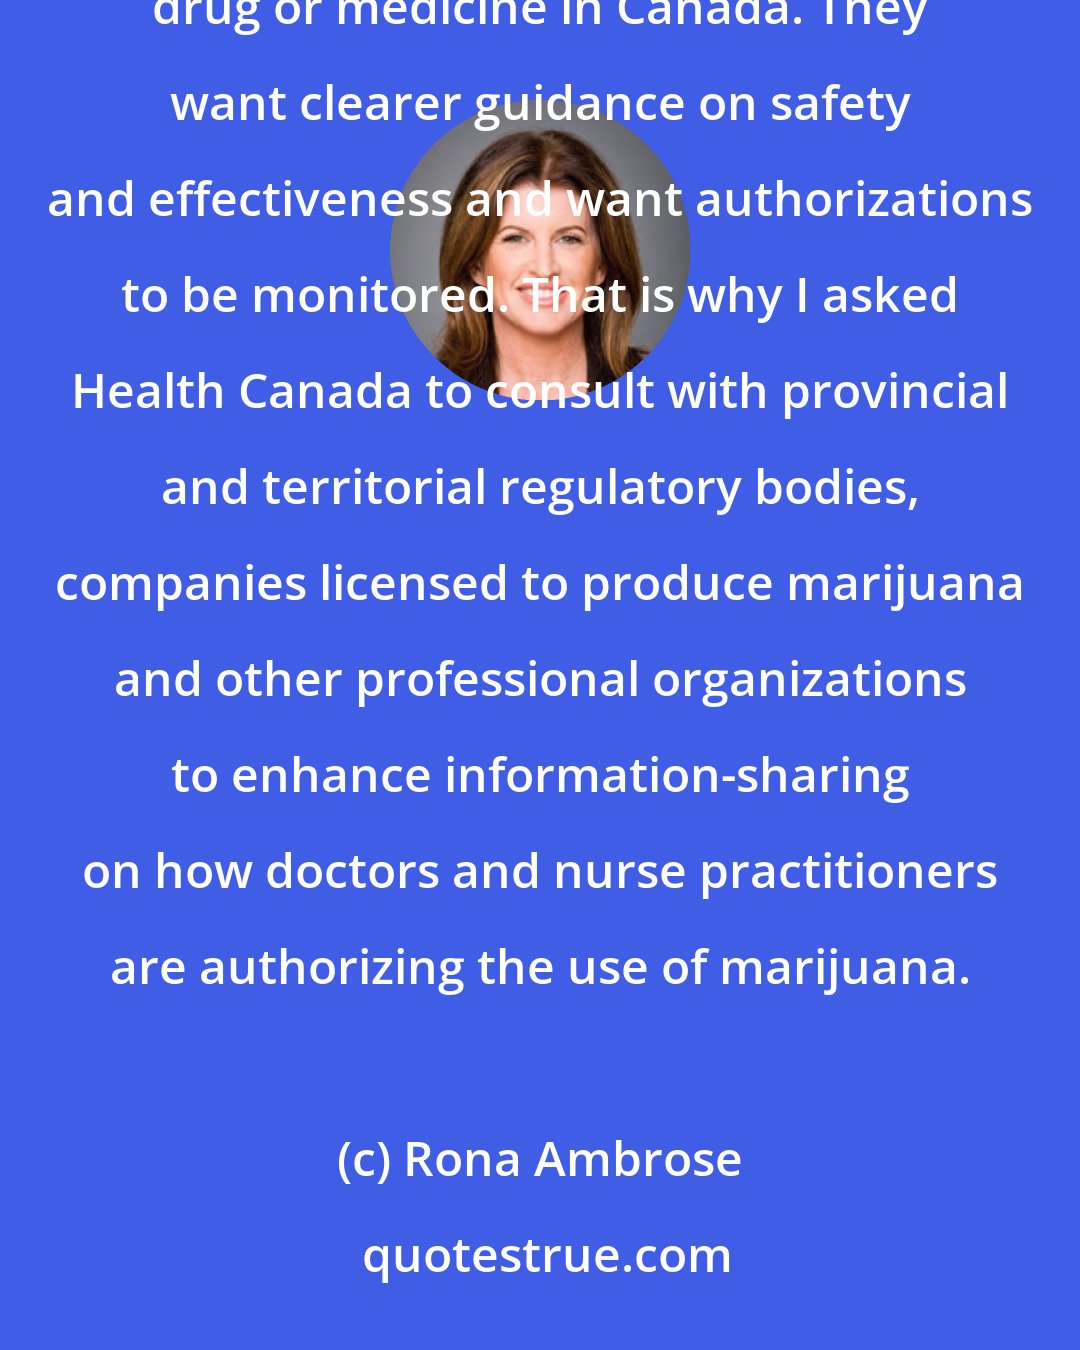 Rona Ambrose: I continue to hear concerns from health professional organizations that dried marijuana is not an approved drug or medicine in Canada. They want clearer guidance on safety and effectiveness and want authorizations to be monitored. That is why I asked Health Canada to consult with provincial and territorial regulatory bodies, companies licensed to produce marijuana and other professional organizations to enhance information-sharing on how doctors and nurse practitioners are authorizing the use of marijuana.